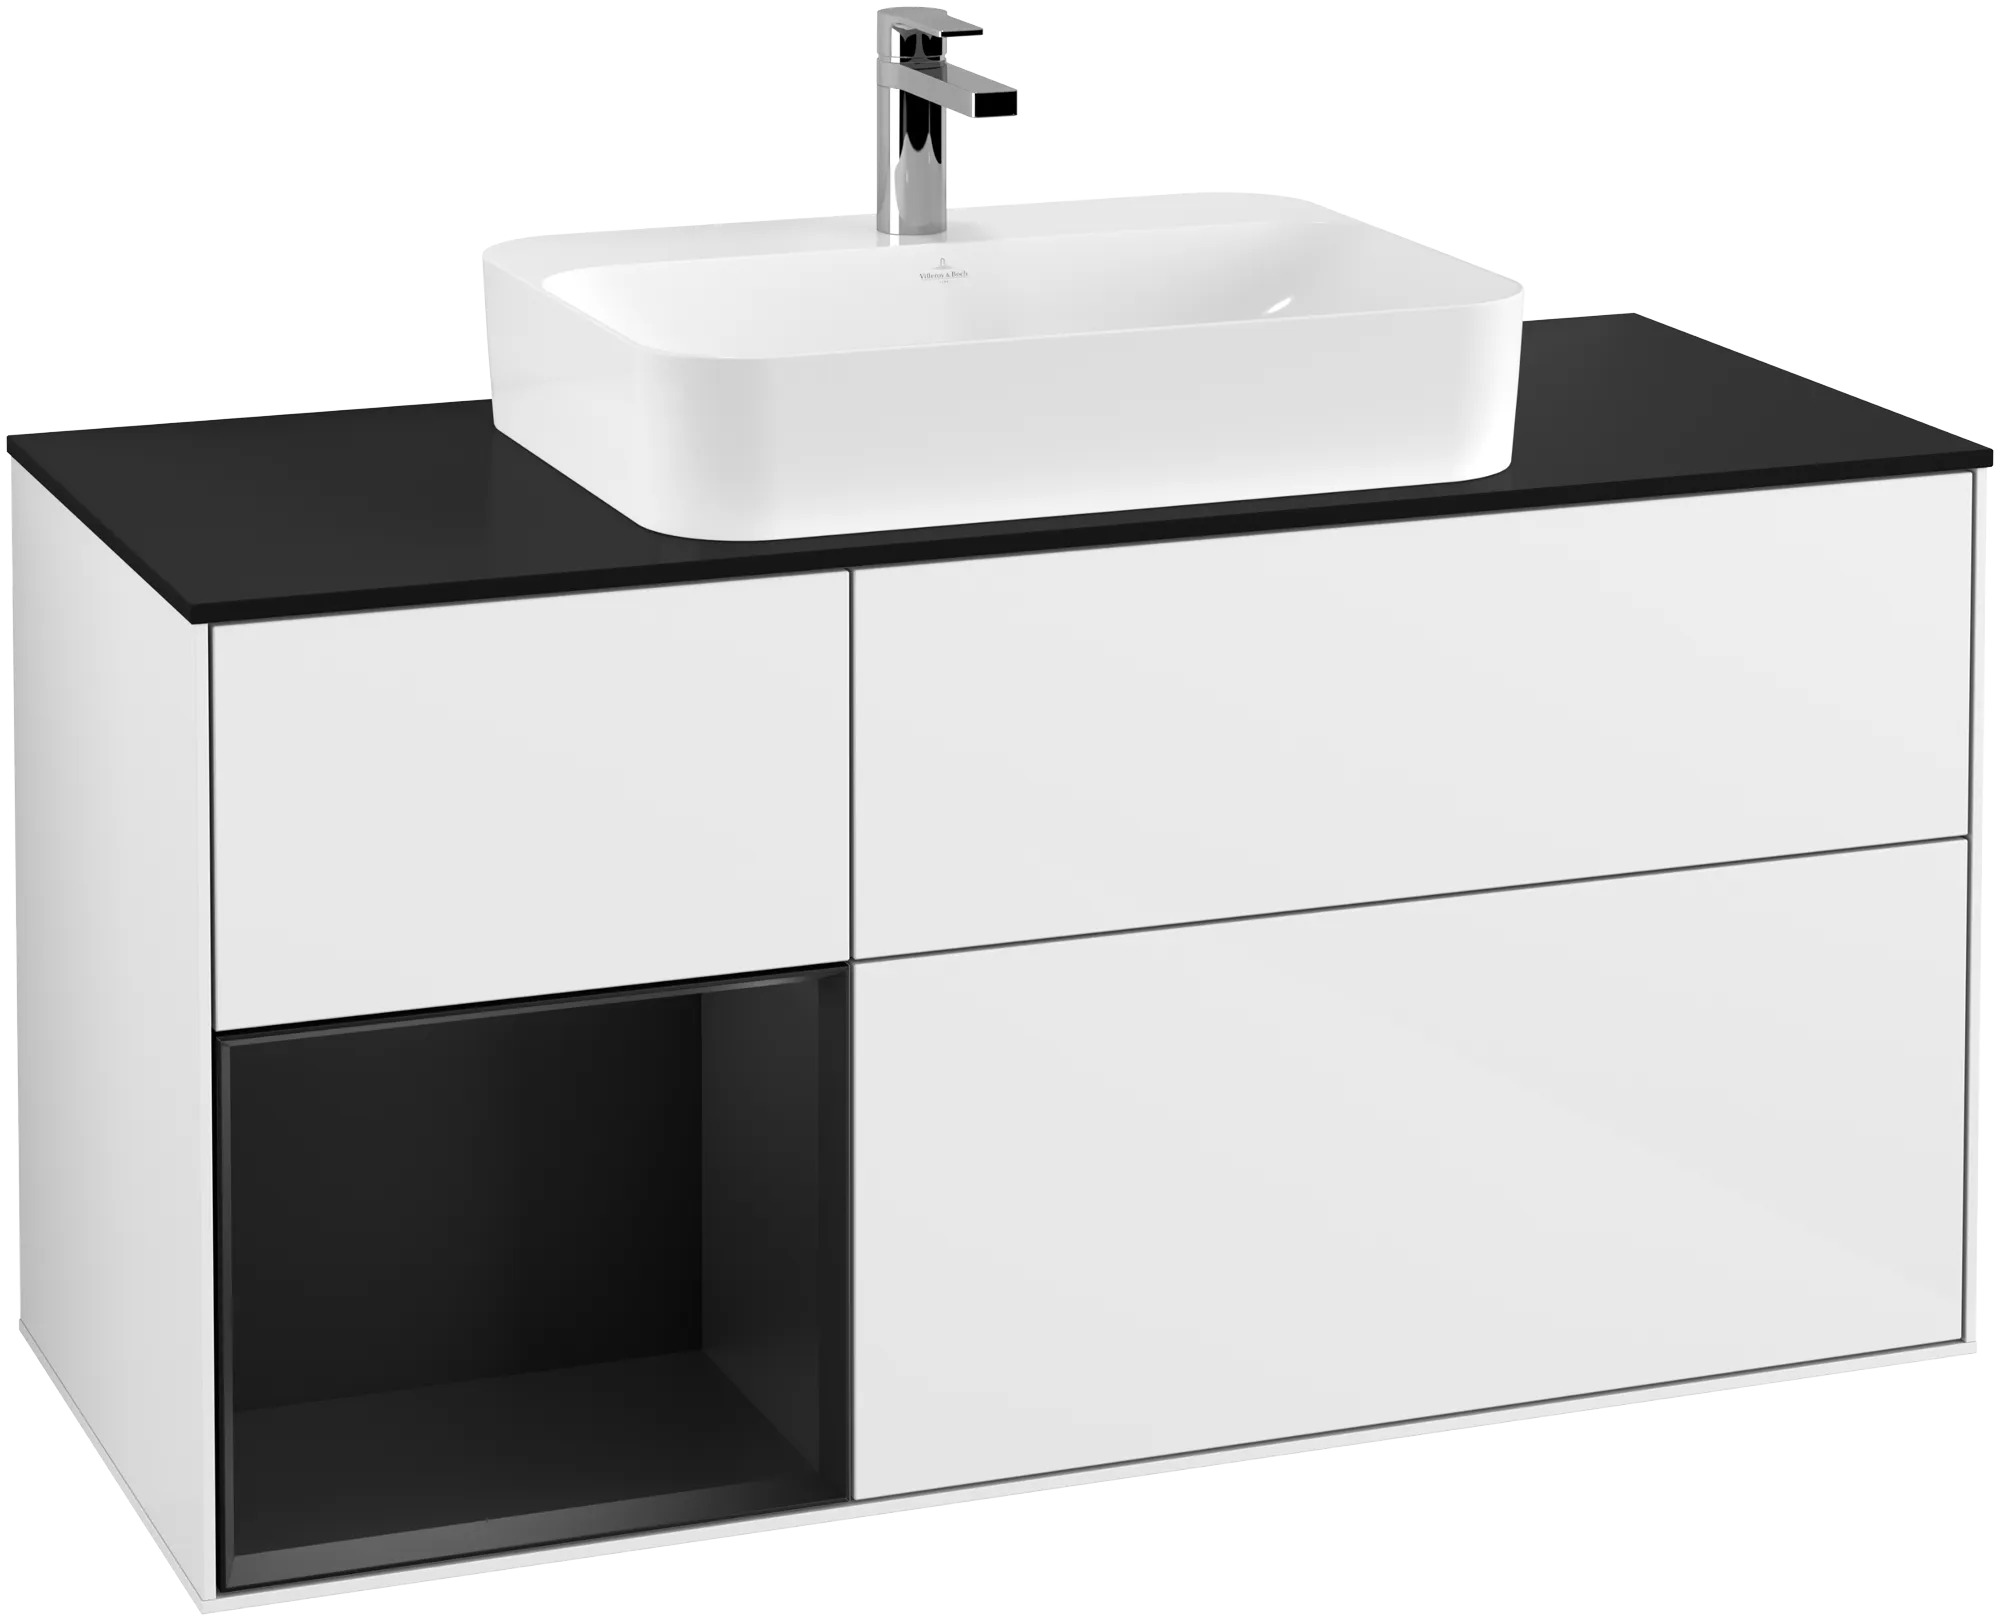 Picture of VILLEROY BOCH Finion Vanity unit, with lighting, 3 pull-out compartments, 1200 x 603 x 501 mm, Glossy White Lacquer / Black Matt Lacquer / Glass Black Matt #G412PDGF